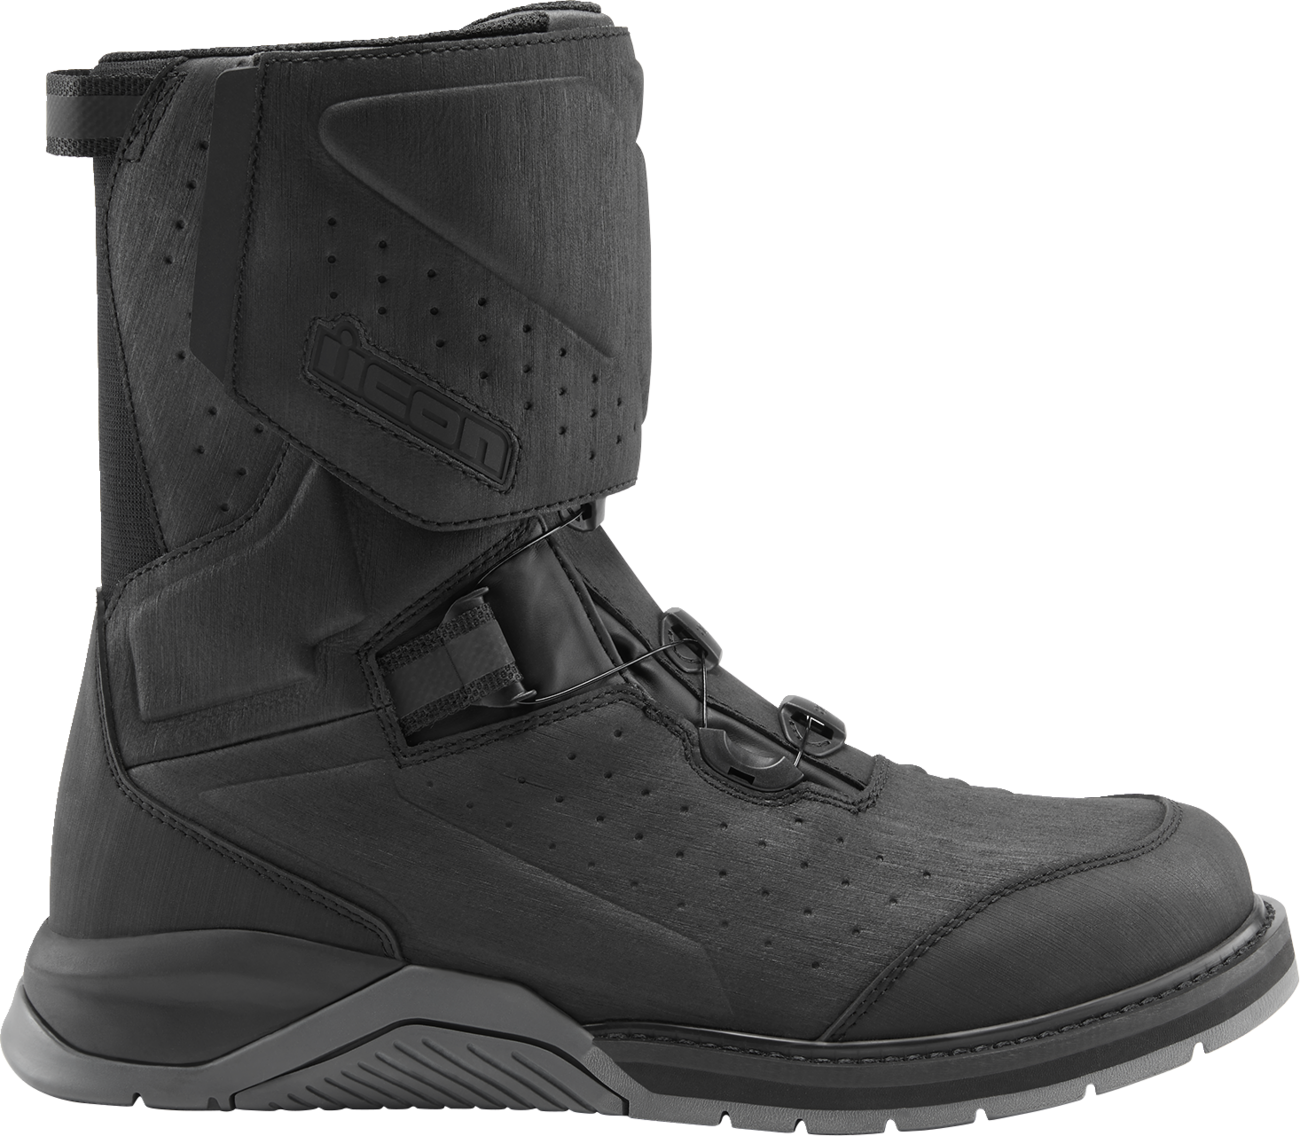 ICON Alcan Waterproof Boots - Black - Size 11.5 3403-1240